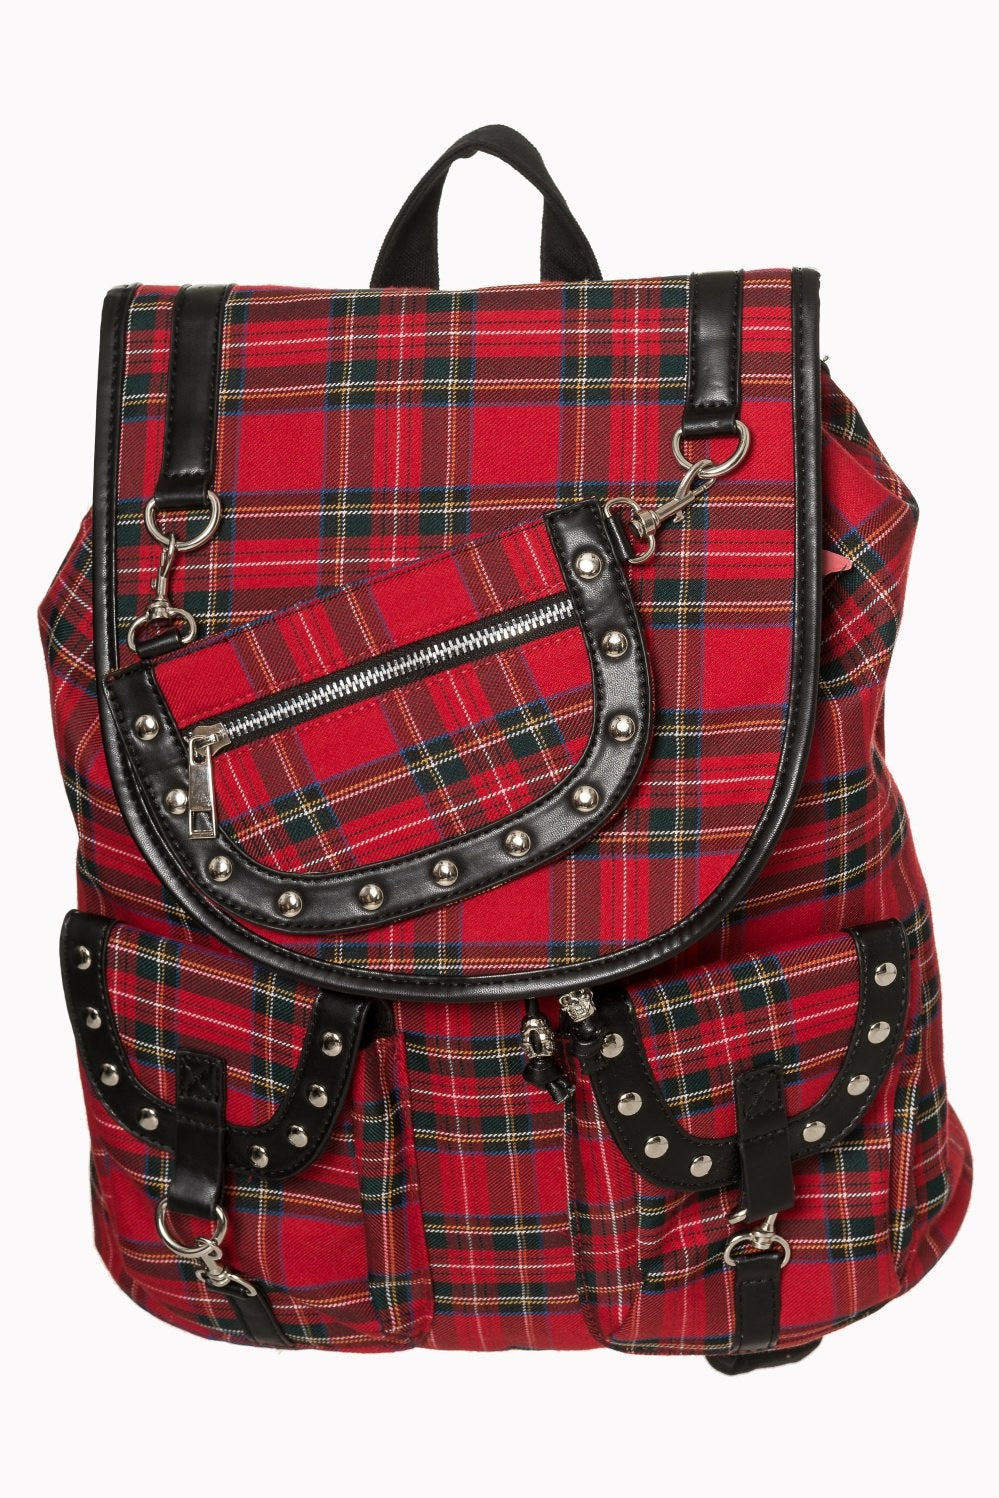 Lost Queen London's "Yamy" Backpack – Punk's Not Dead Red Tartan Edition